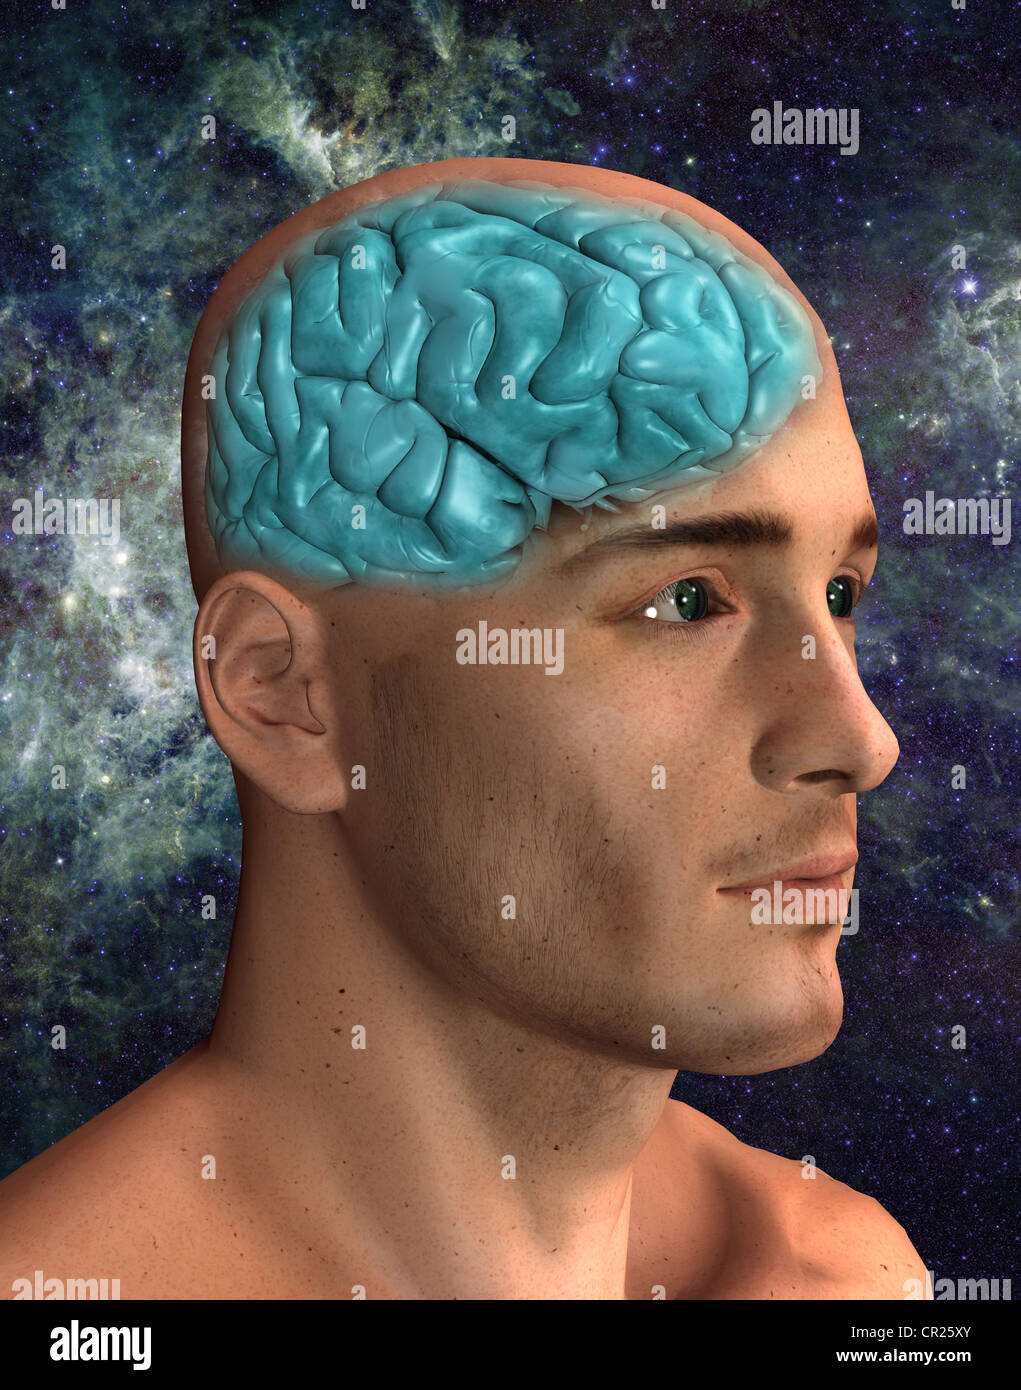 illustration of a human brain within a man's head Stock Photo